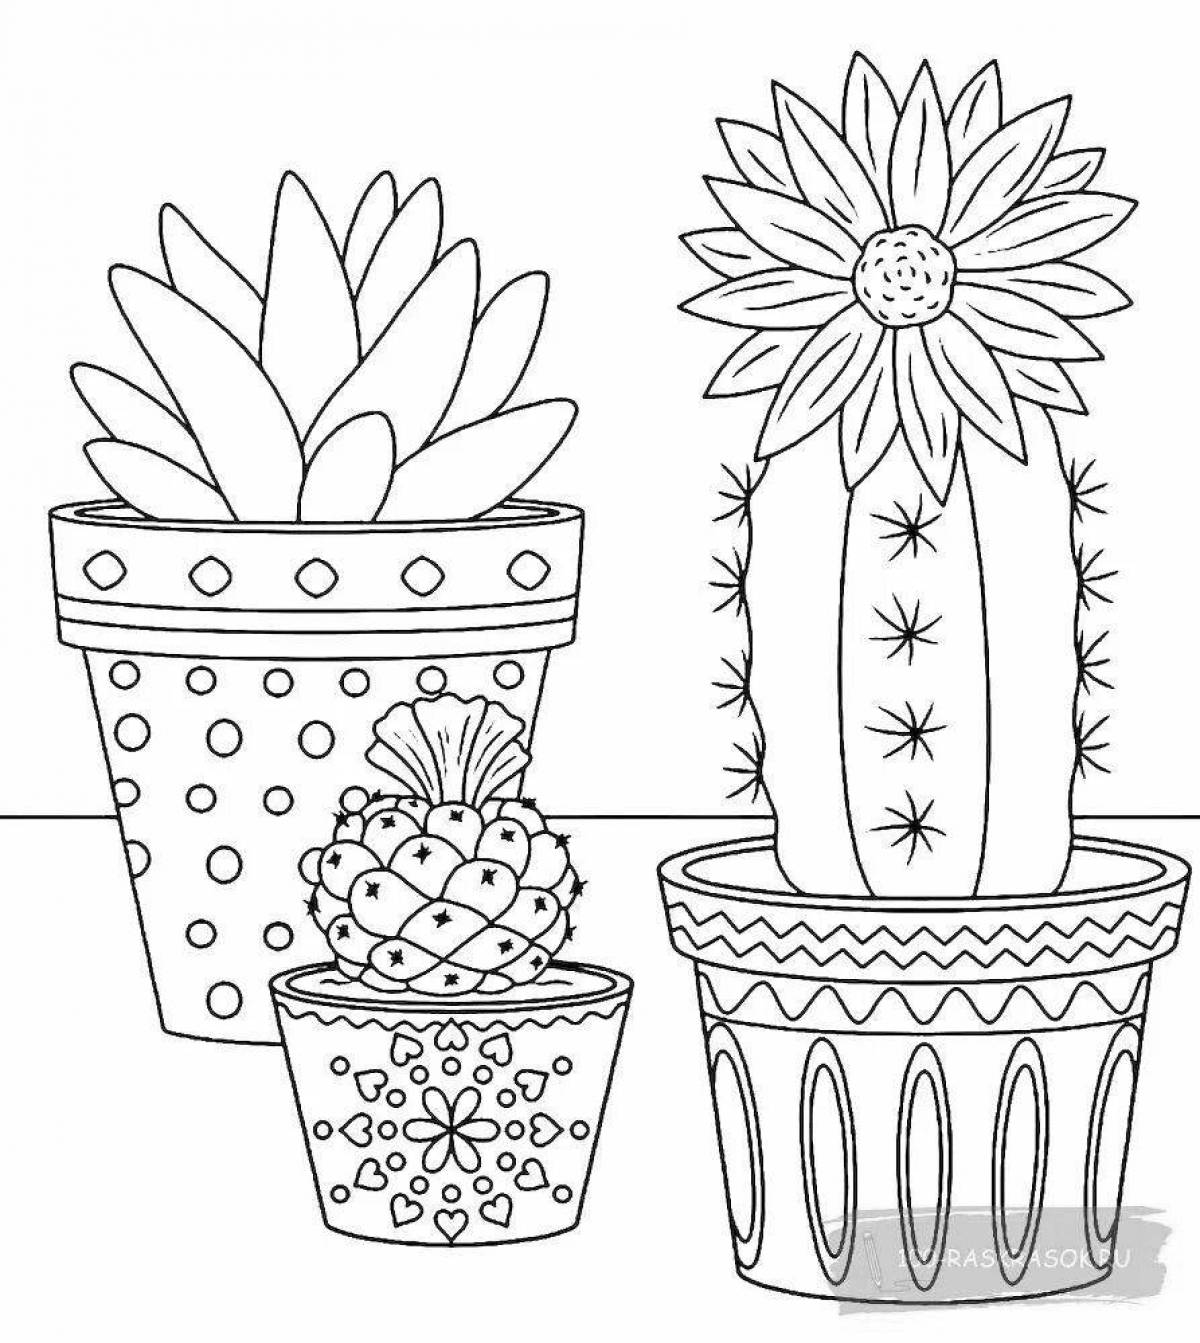 Amazing indoor plants coloring pages for kids